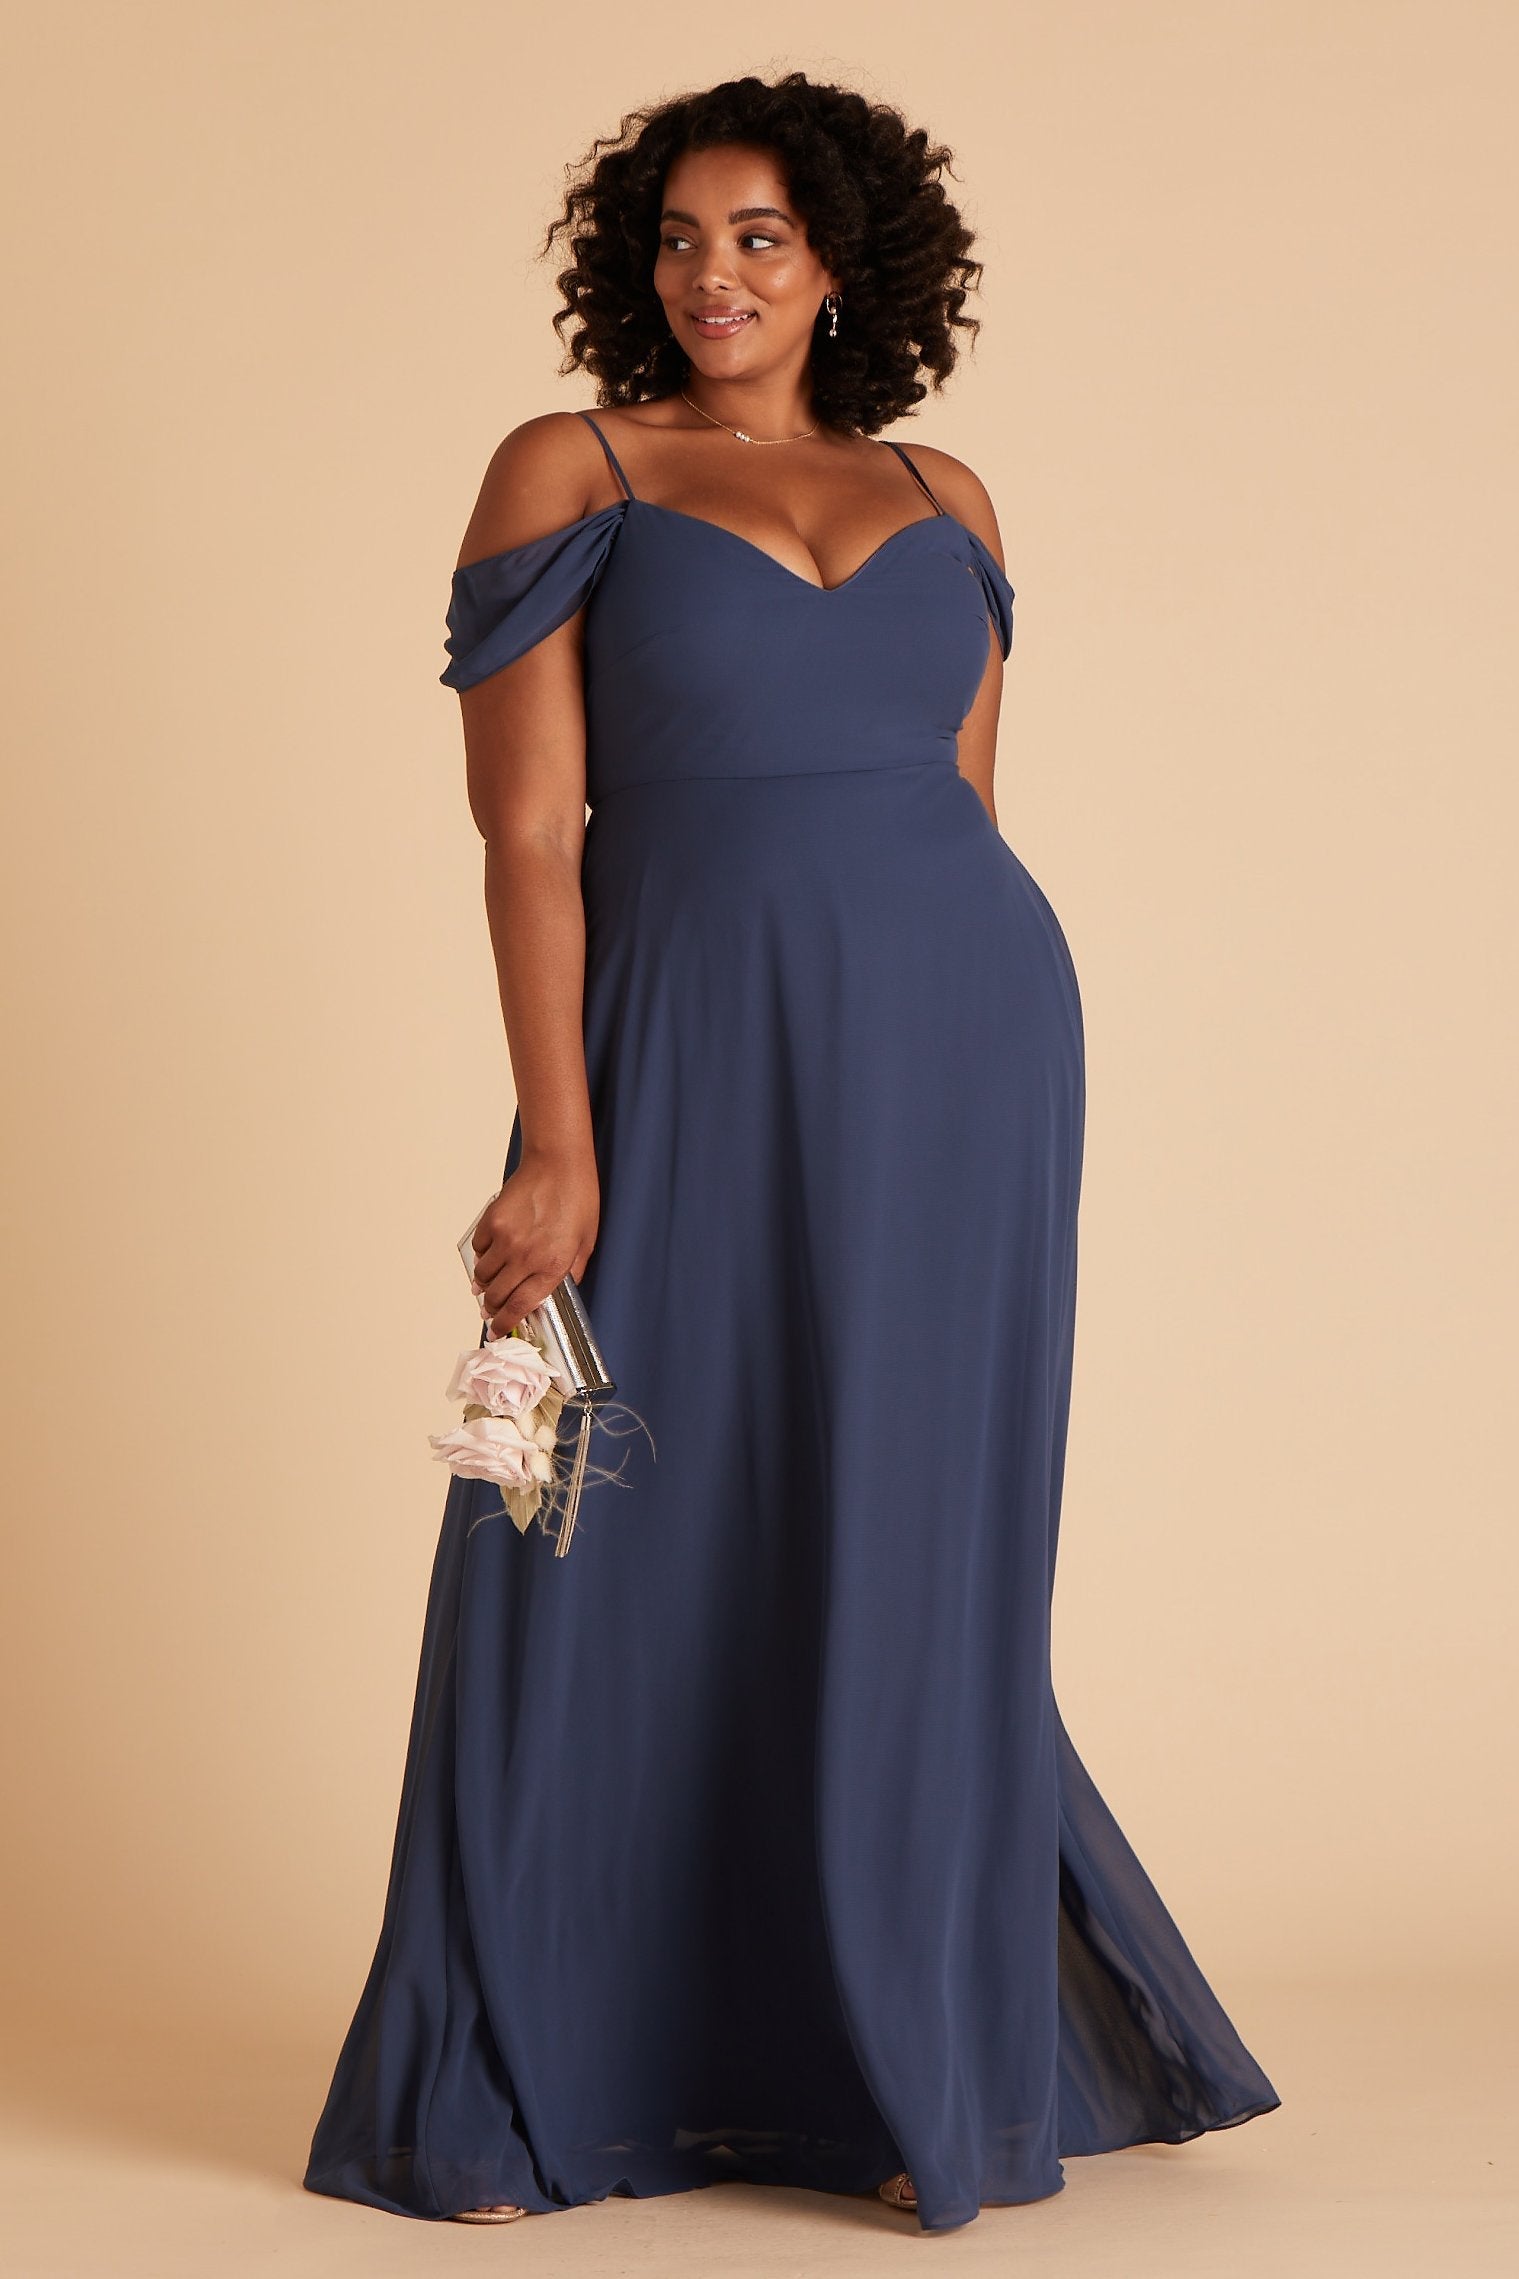 Devin convertible plus size bridesmaids dress in slate blue chiffon by Birdy Grey, front view